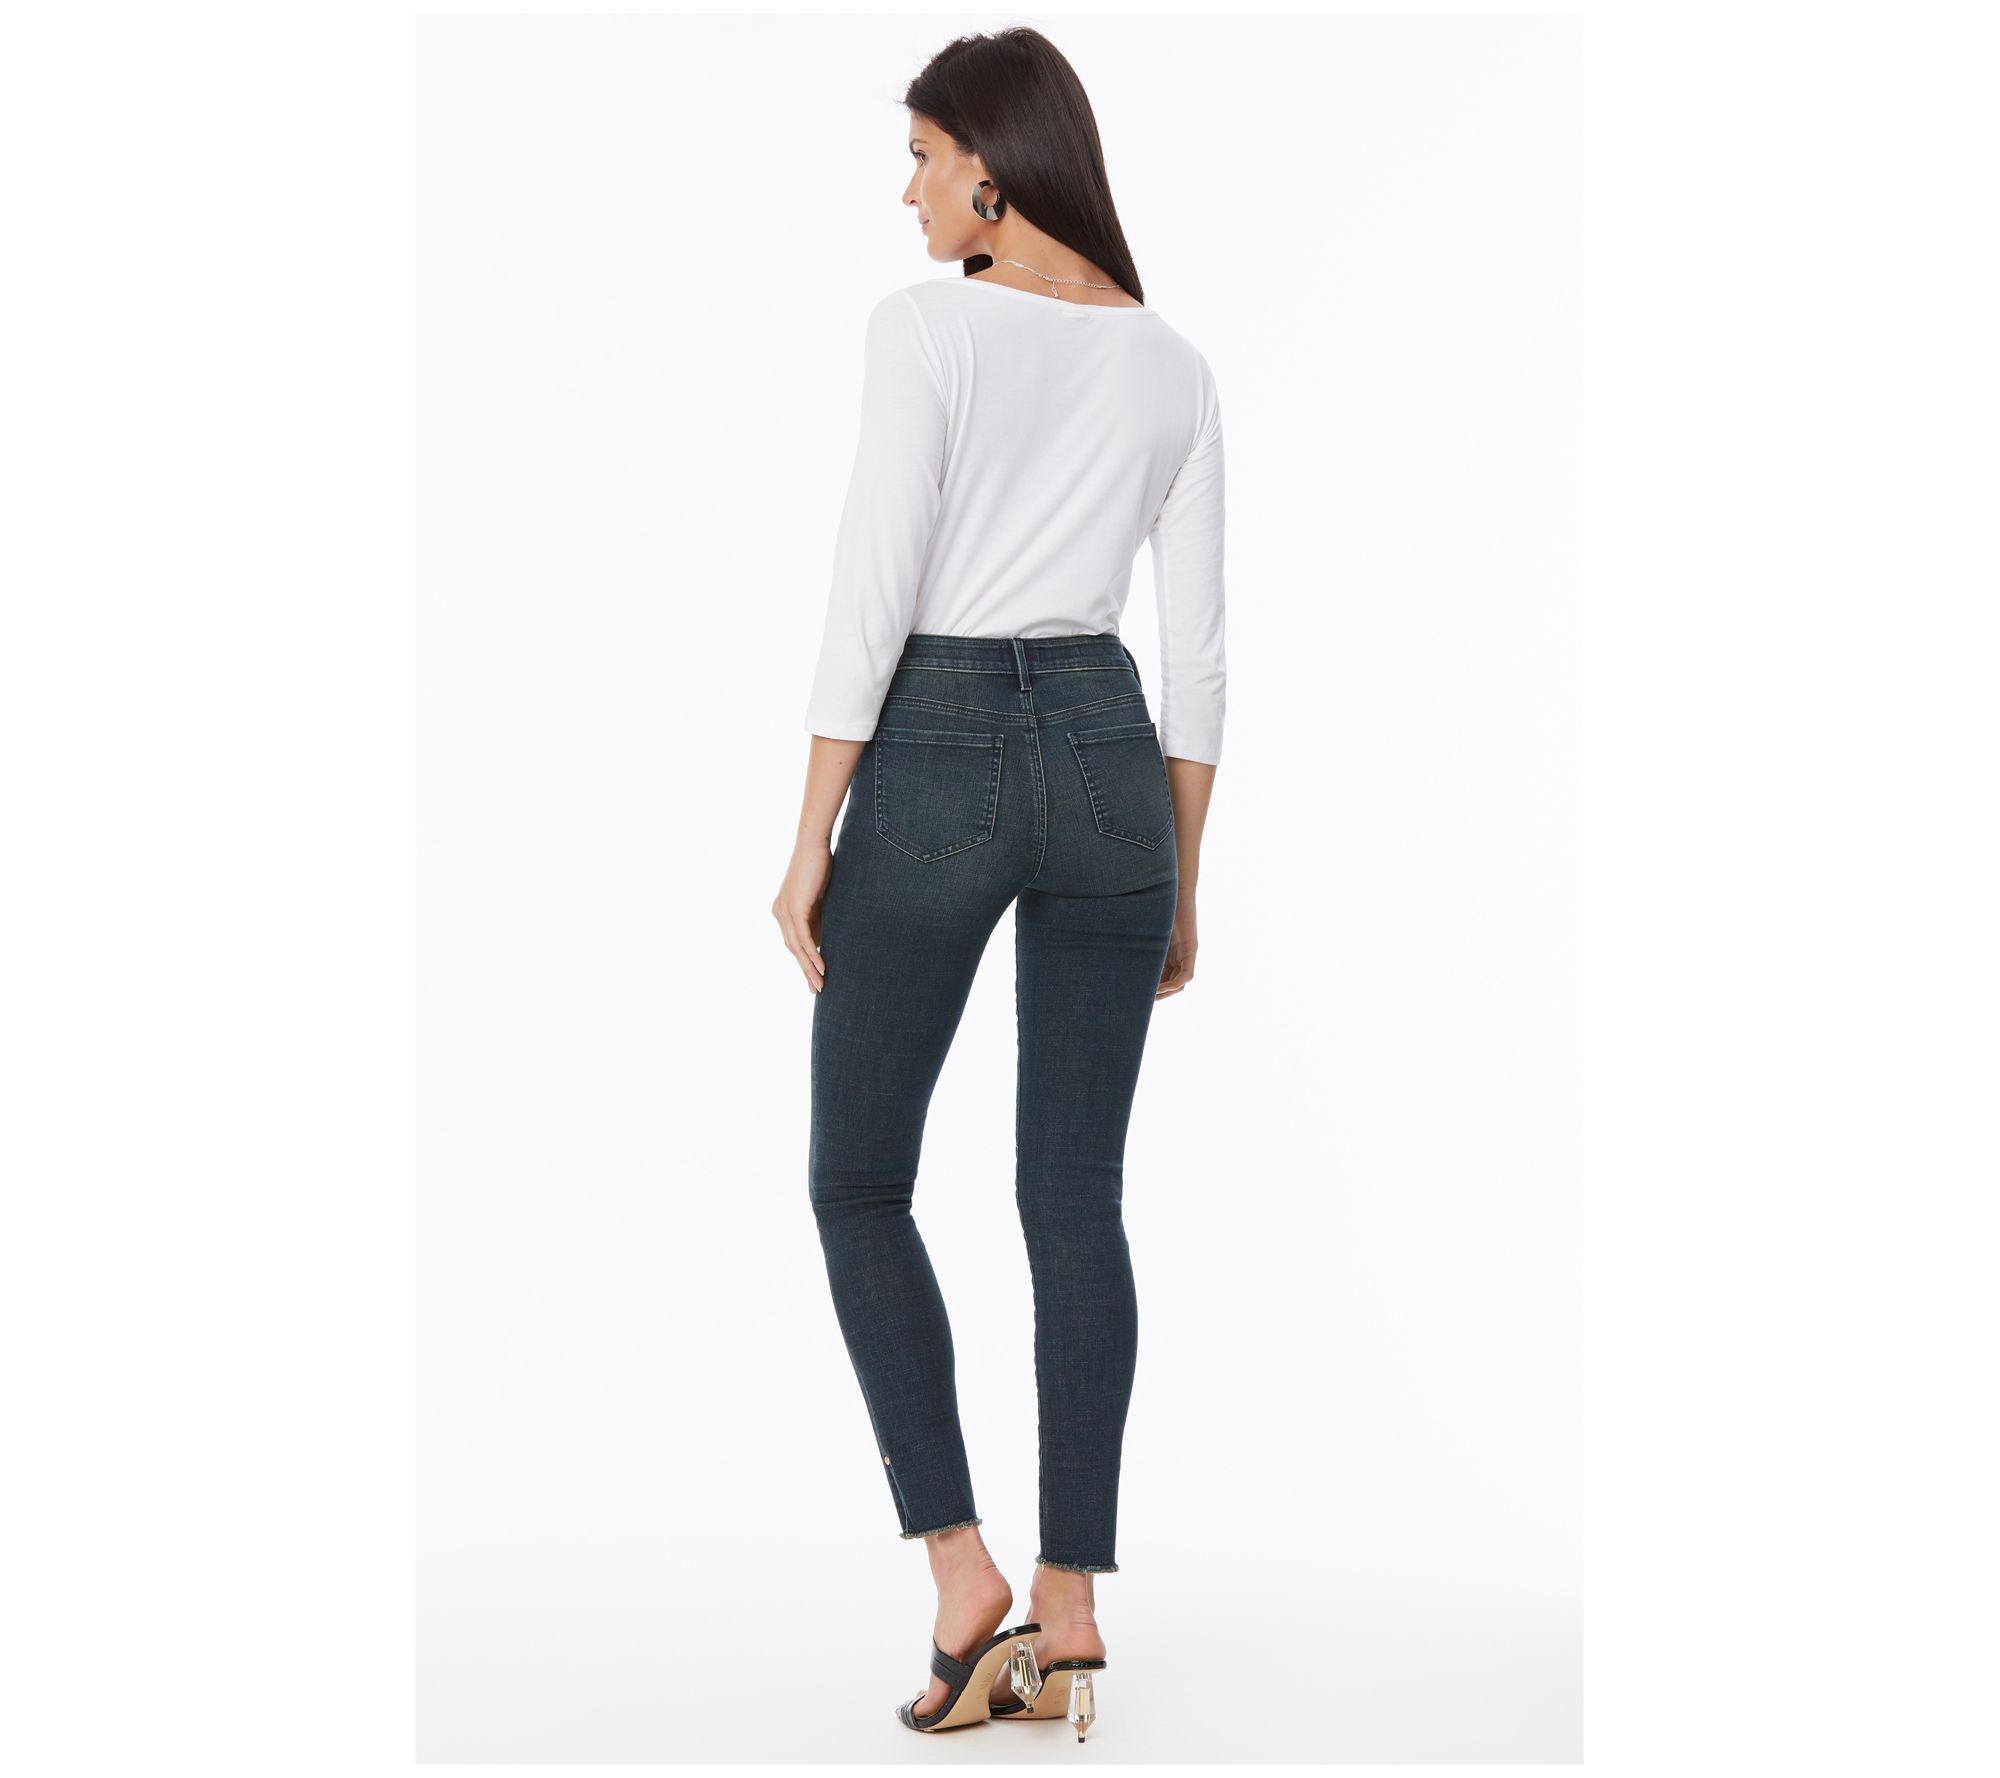 NYDJ Ami Skinny Ankle Jeans with Riveted Side Slits - QVC.com